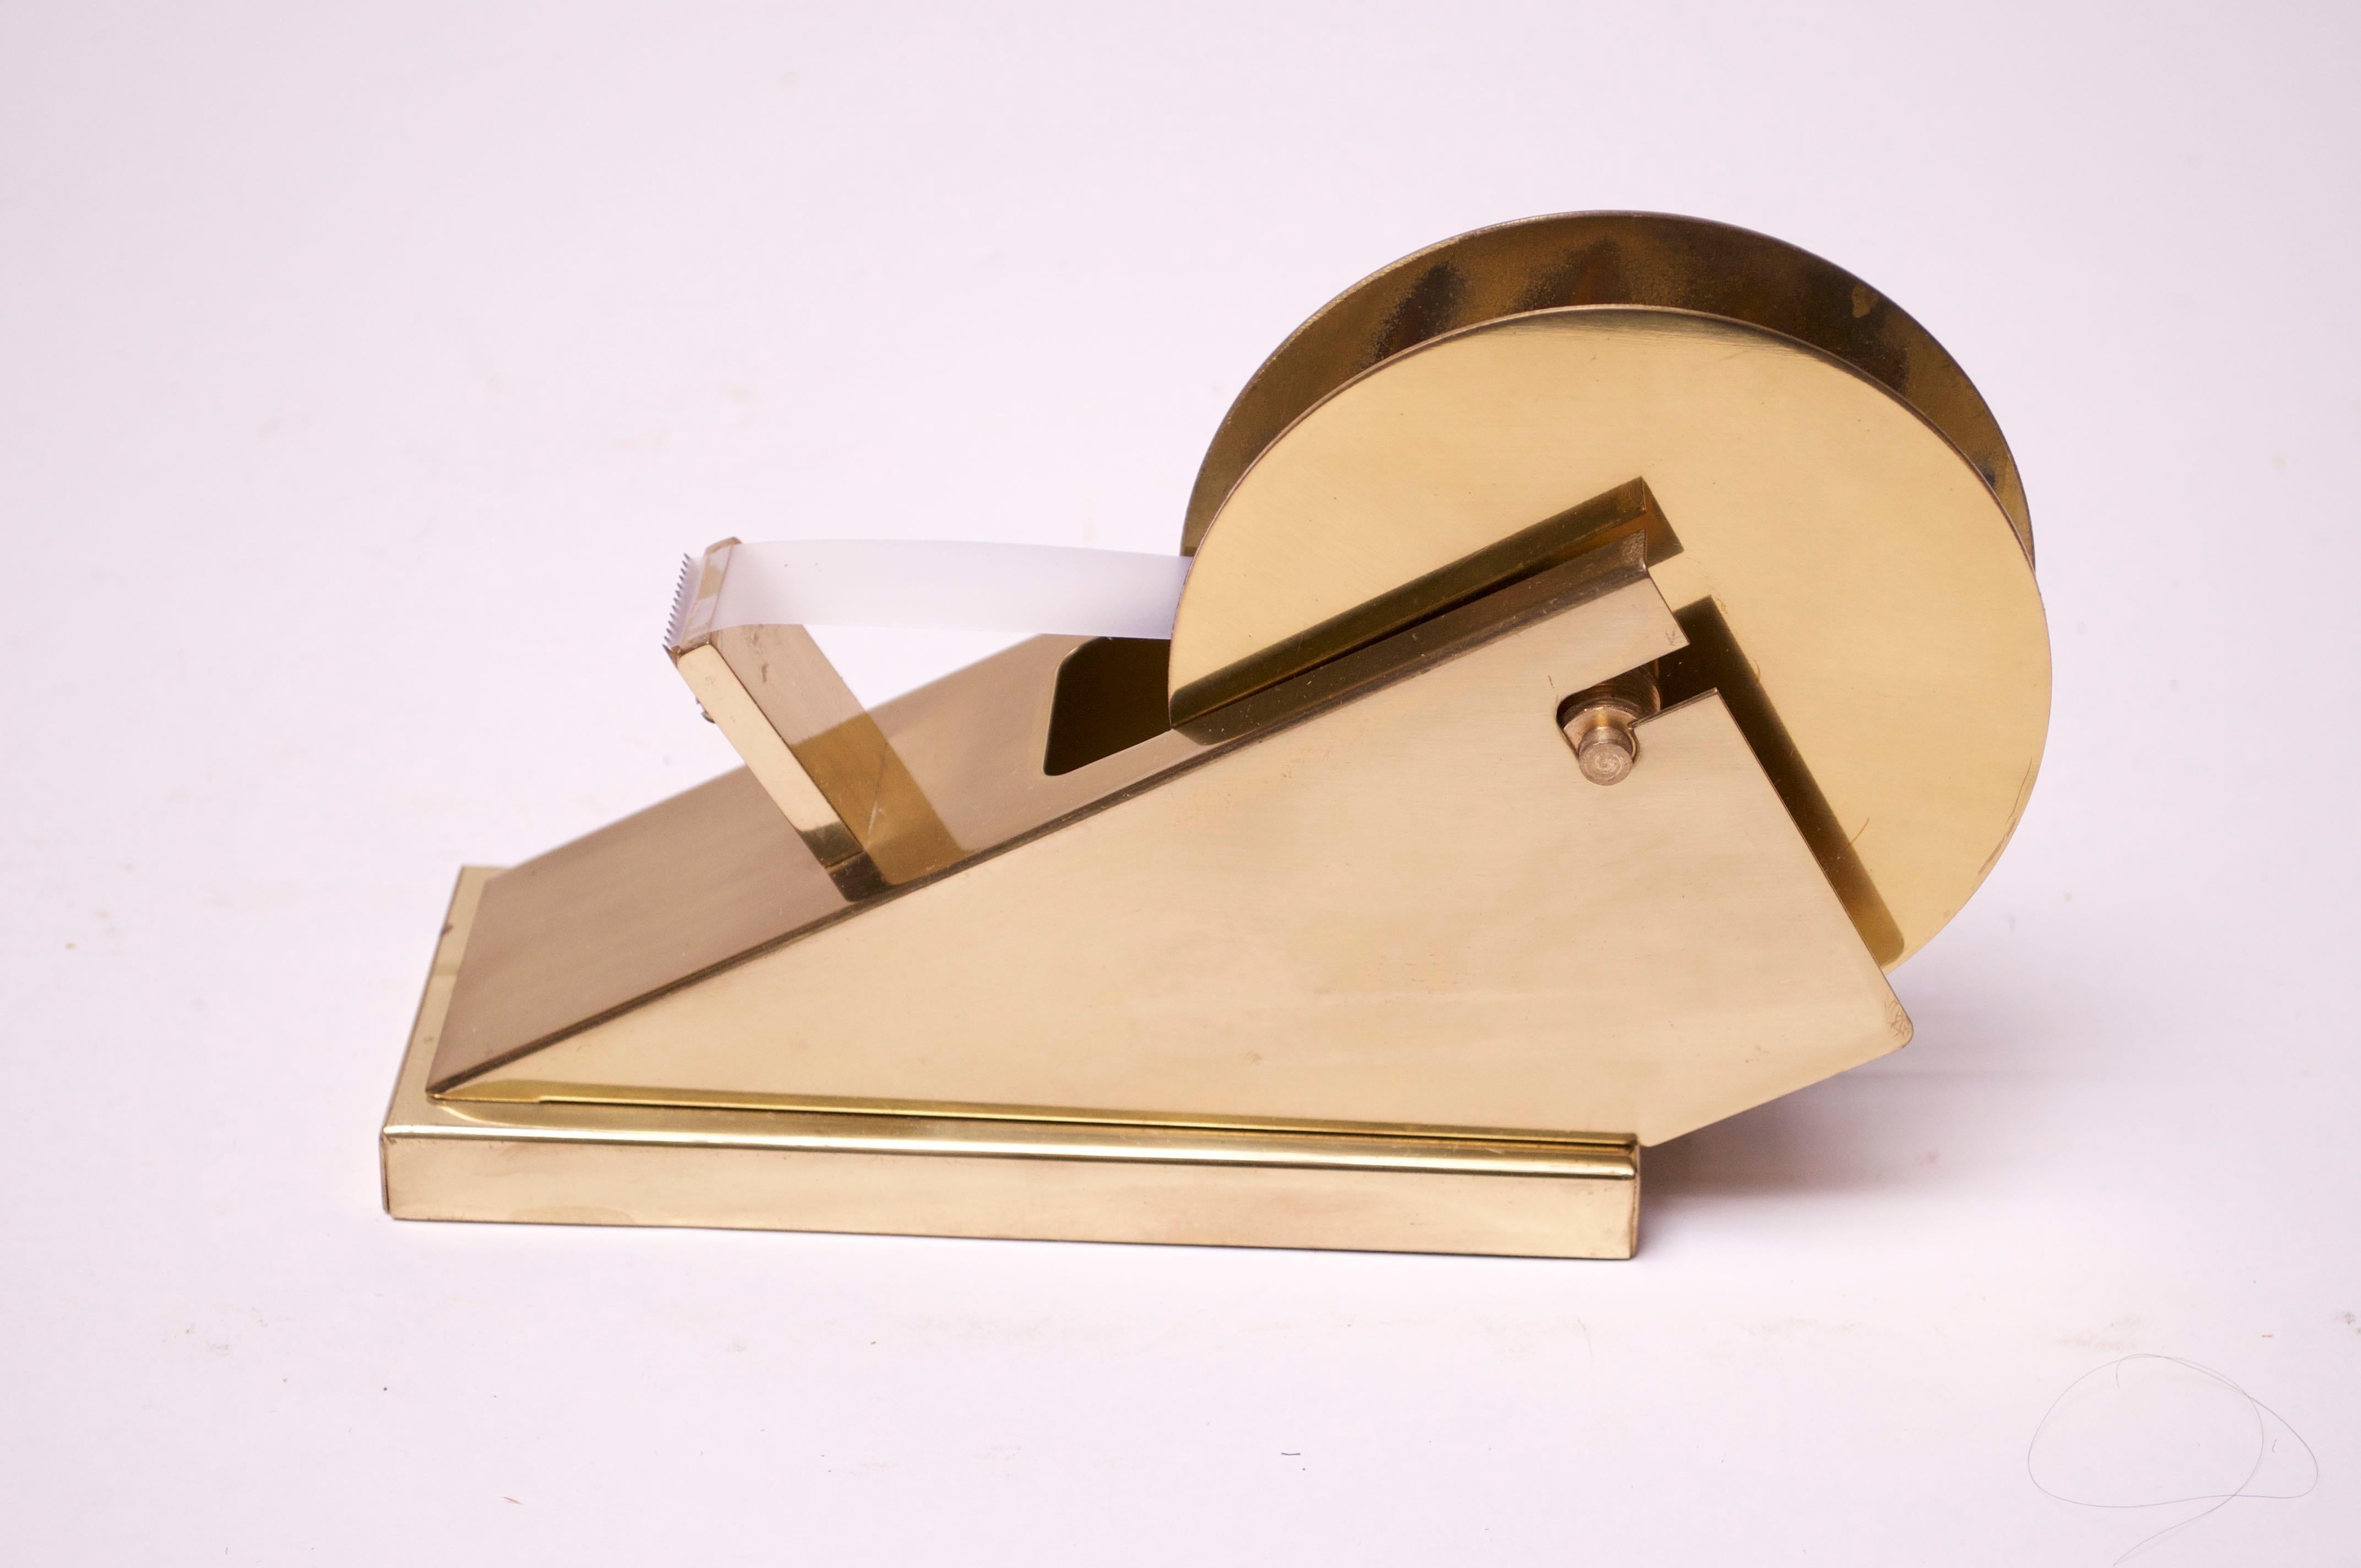 Modernist tape dispenser circa (1970s USA) in polished brass. The circular disks that hold the roll of tape in place adjust to accommodate different sized rolls. There are some lines of tarnish to the interior circular plate (can only be subtly